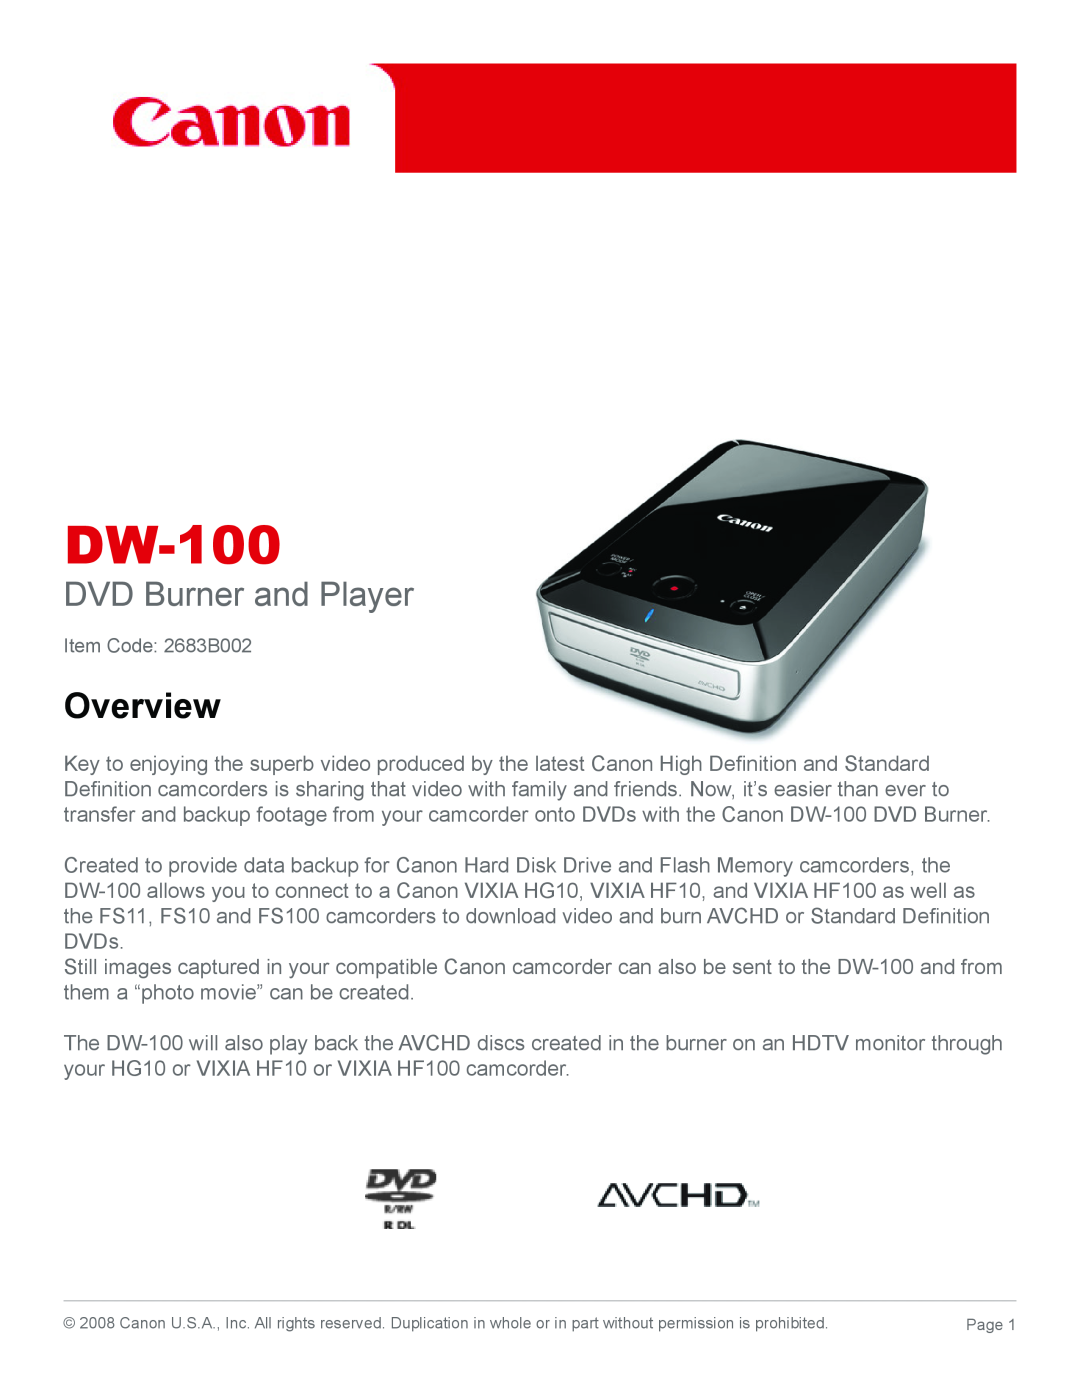 Canon DW-100 manual Overview, DVD Burner and Player 